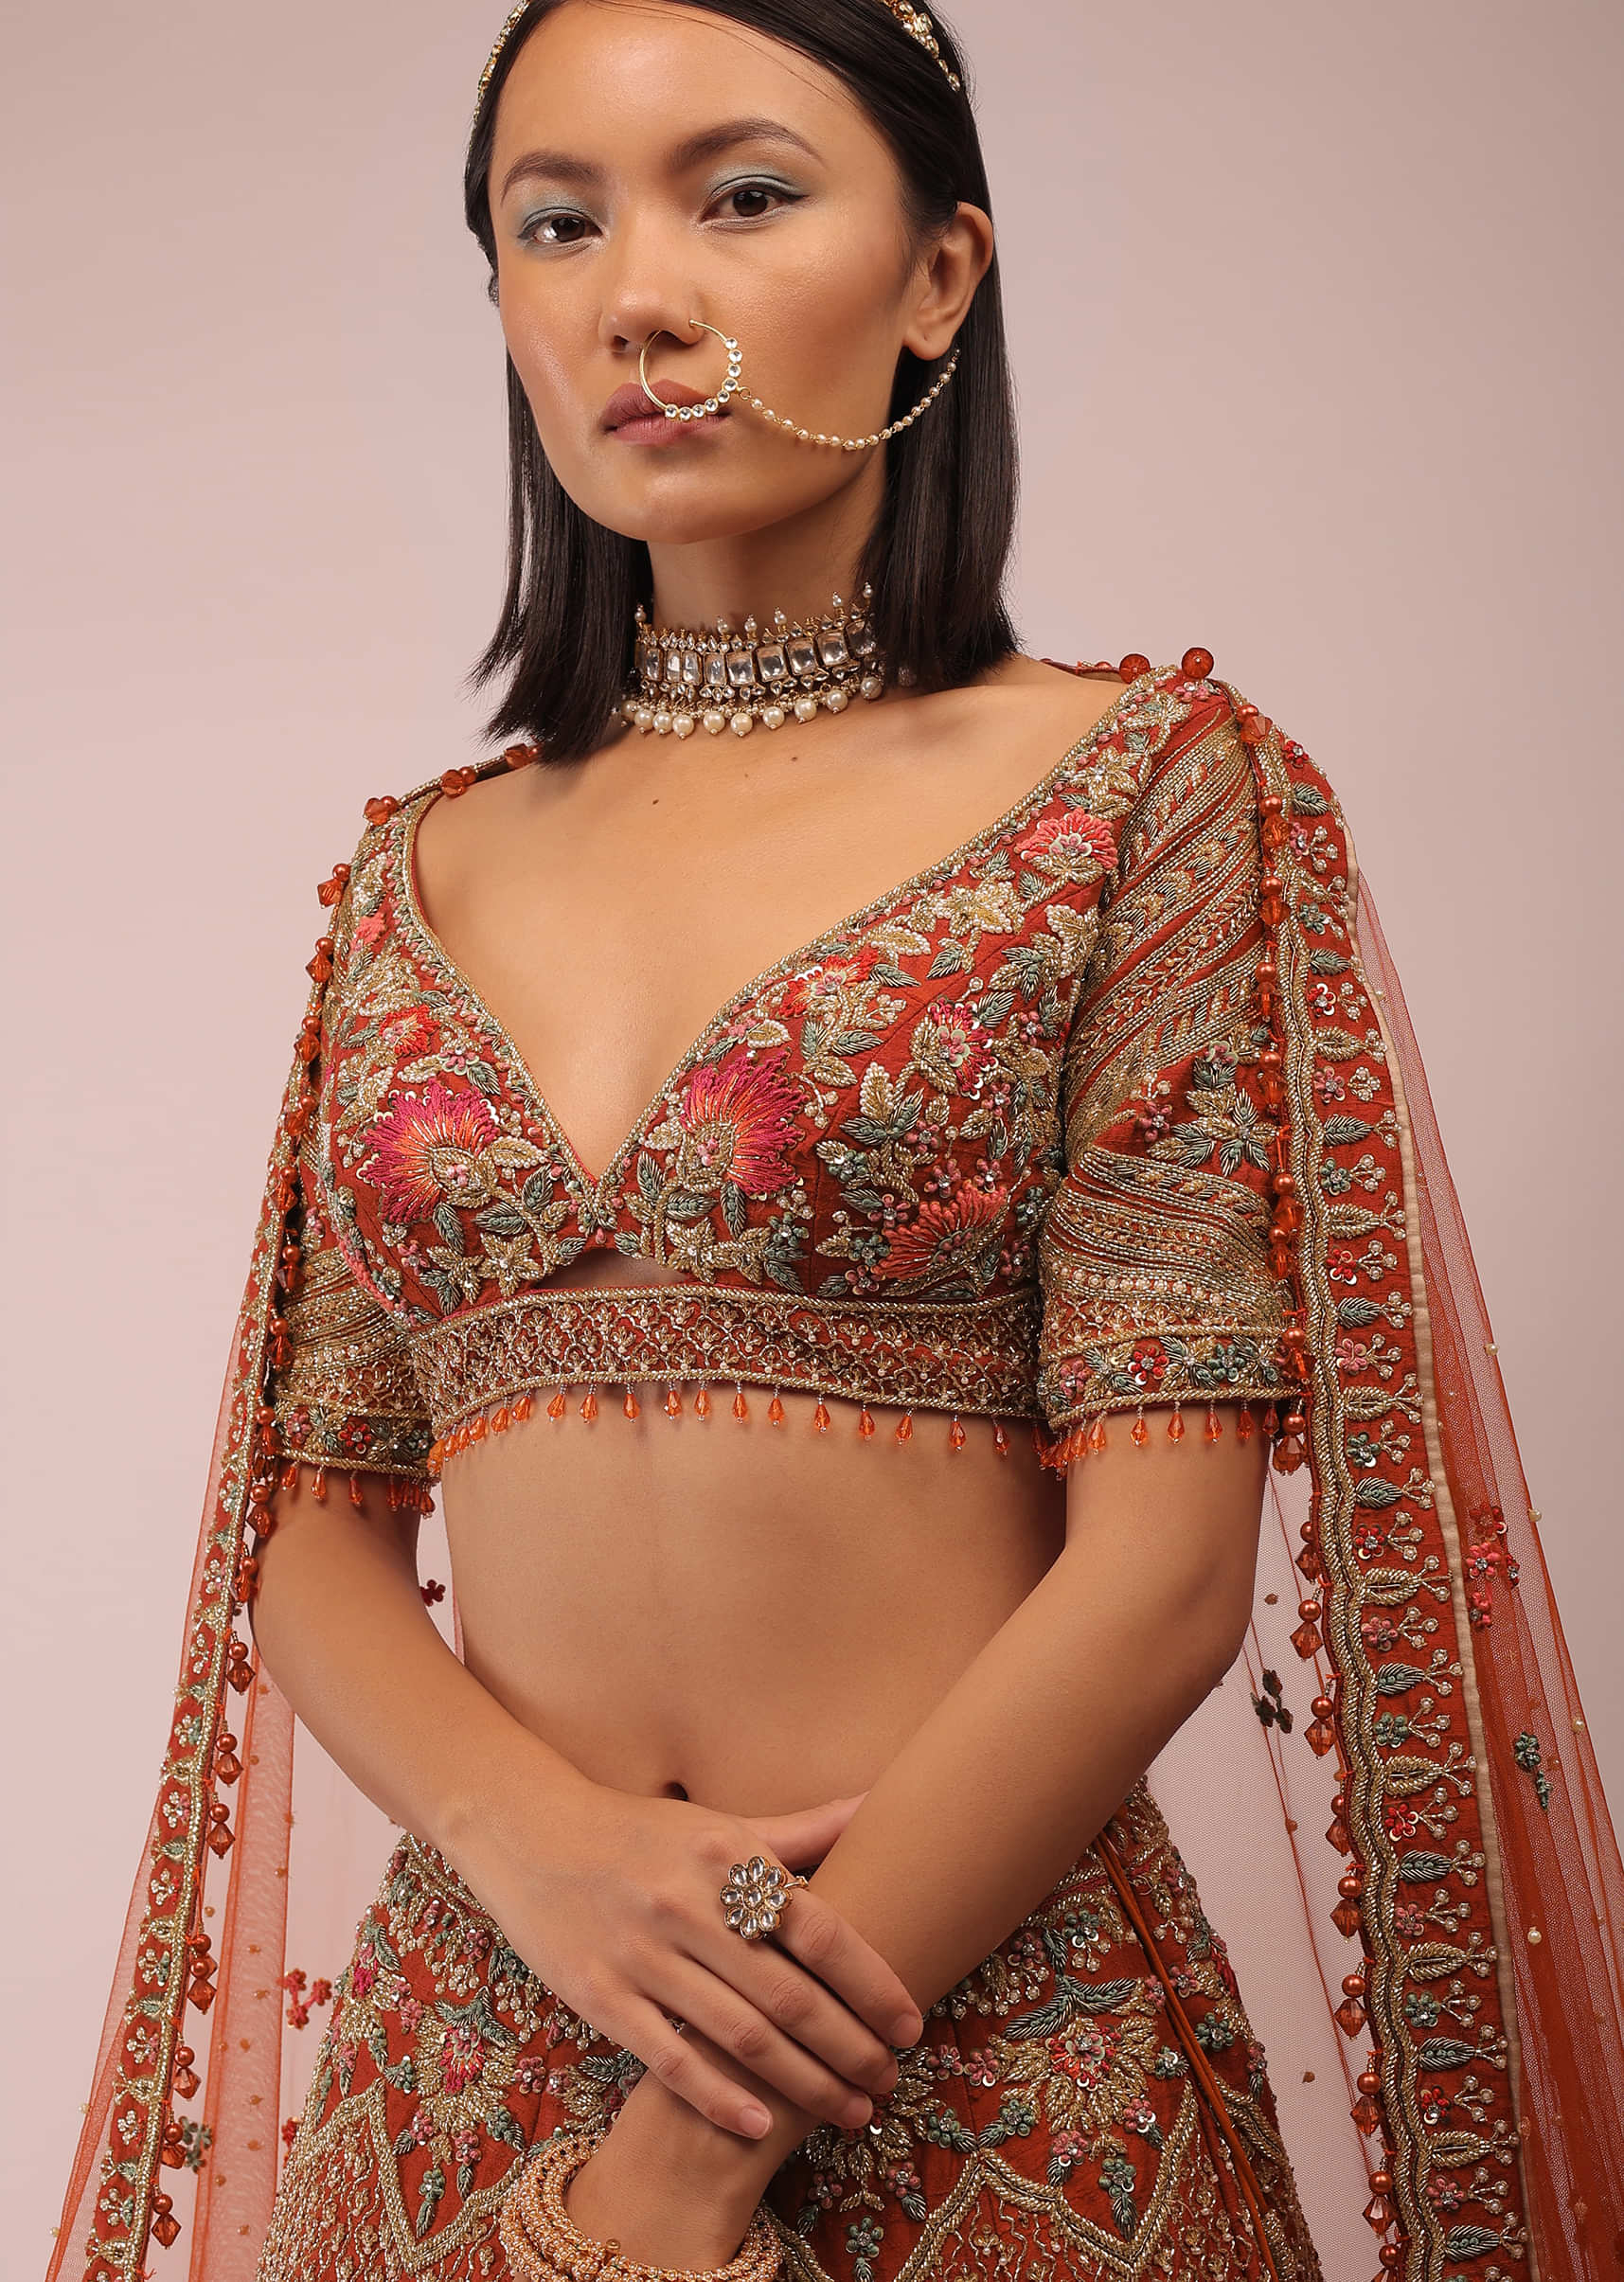 Red Lehenga In Floral Motifs Inspired By Mughal Design Embroidered In Resham And Beads In Kalis, Choli In Scalloped Neckline In Resham Work Embroidery